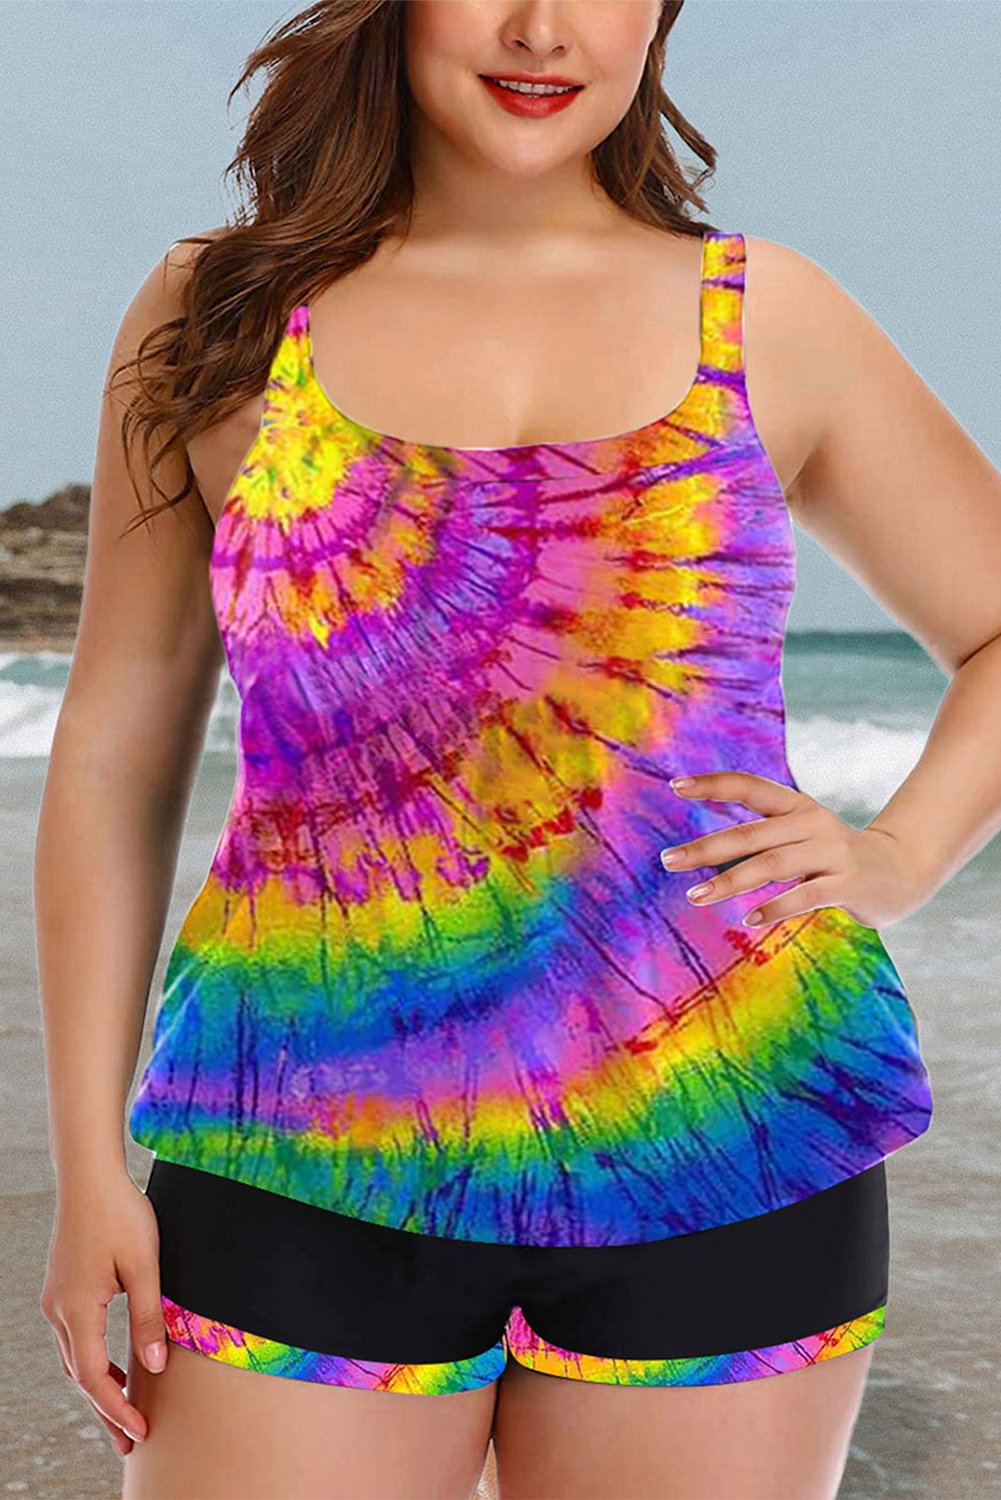 Women's Plus Size Rainbow Swirl Tie Dye Tankini with Shorts Square Neck Pocket Padded Two Piece Swimsuits Bathing Suit